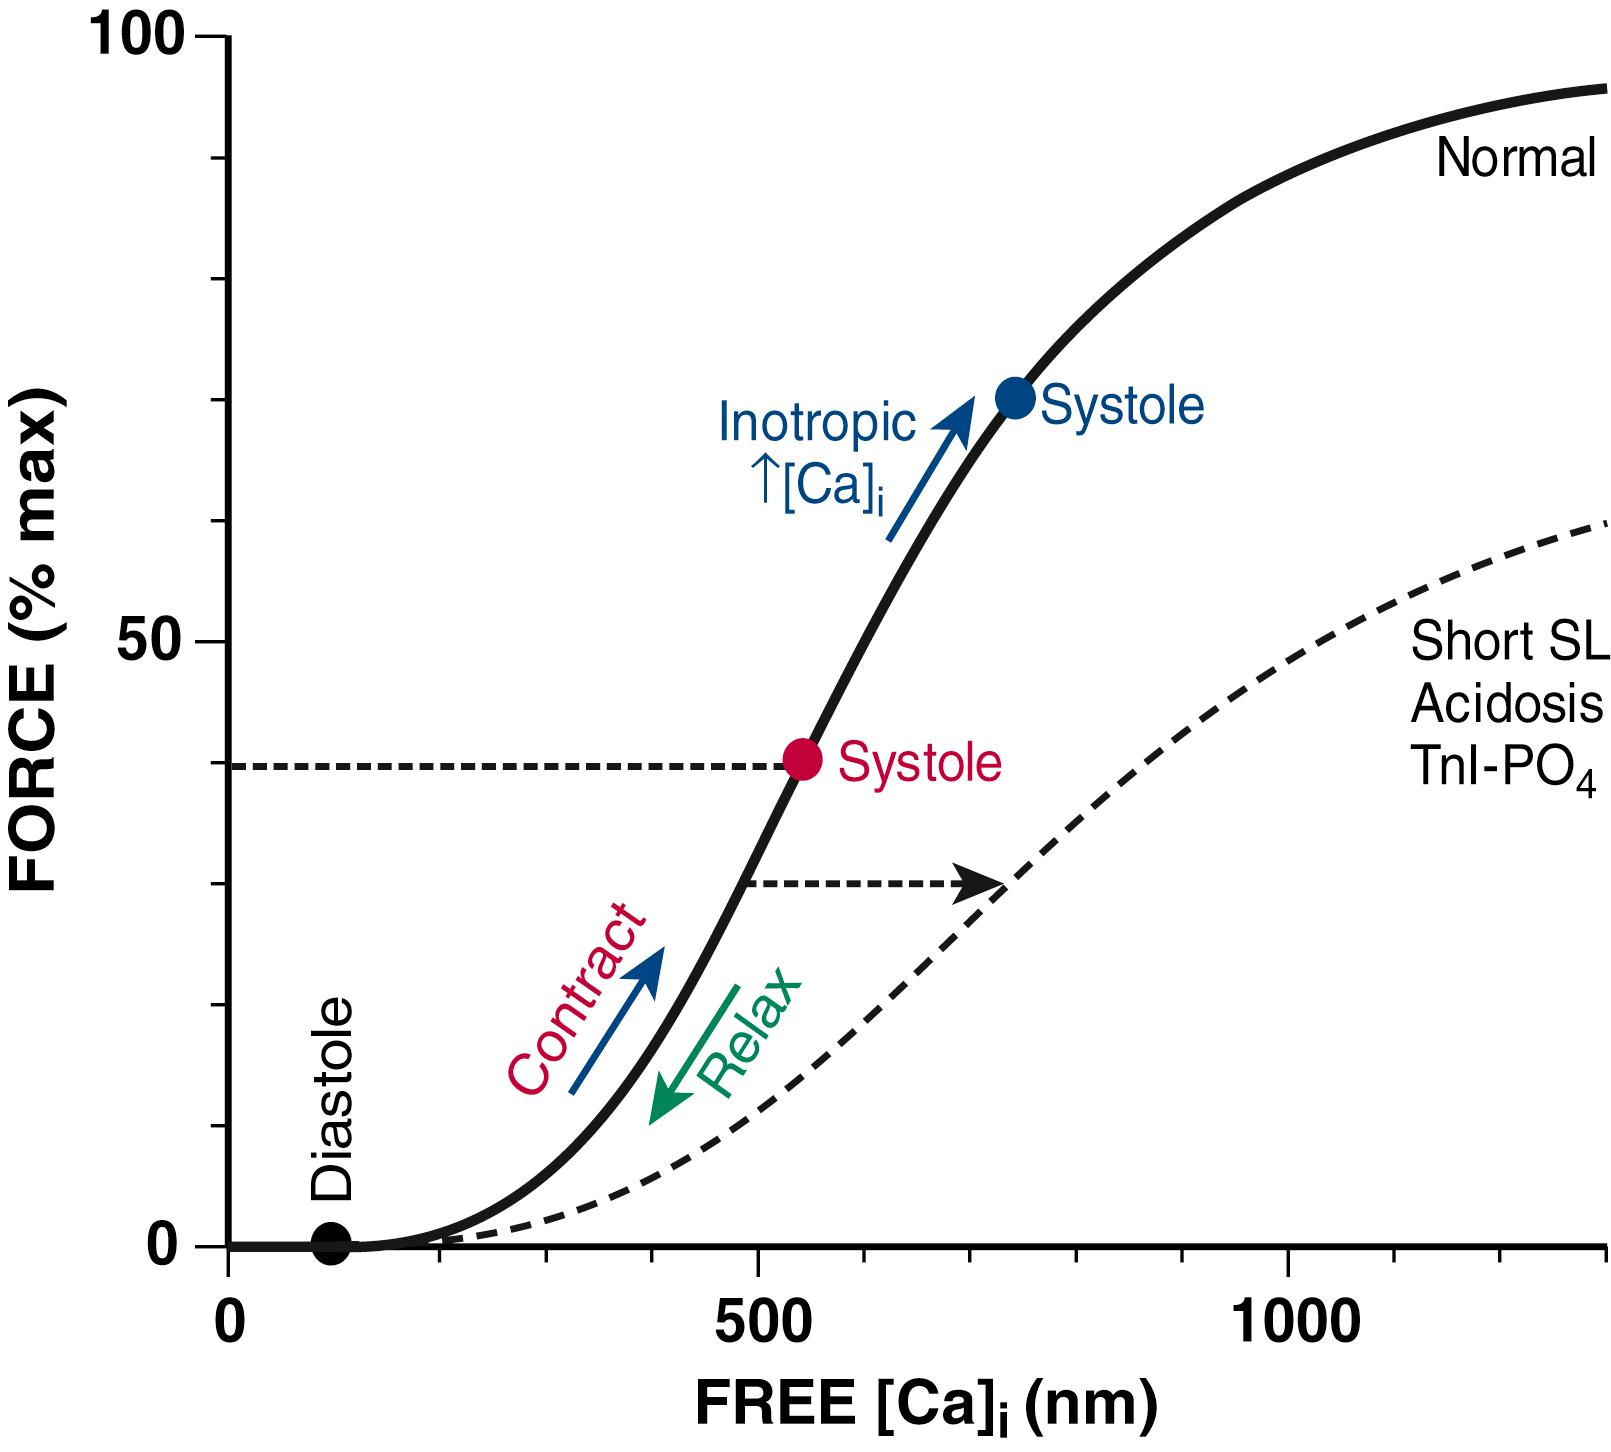 FIGURE 46.7, Myofilament Ca 2+ sensitivity. Active force development in cardiac muscle depends on the cytosolic free [Ca] i . As [Ca] i rises during systole, force develops as dictated by the sigmoidal myofilament Ca 2+ sensitivity curve ( solid curve ; Force = 100/(1+[600 nm]/[Ca] i ) 4 ). As [Ca] i declines relaxation ensues and force declines. If peak [Ca] i increases (as in inotropy) the peak force can reach a higher value. At shorter sarcomere length (SL), acidosis, and troponin I (TnI) phosphorylation, the myofilament Ca 2+ sensitivity is reduced, and the former two also decrease maximal force ( dashed curve ).